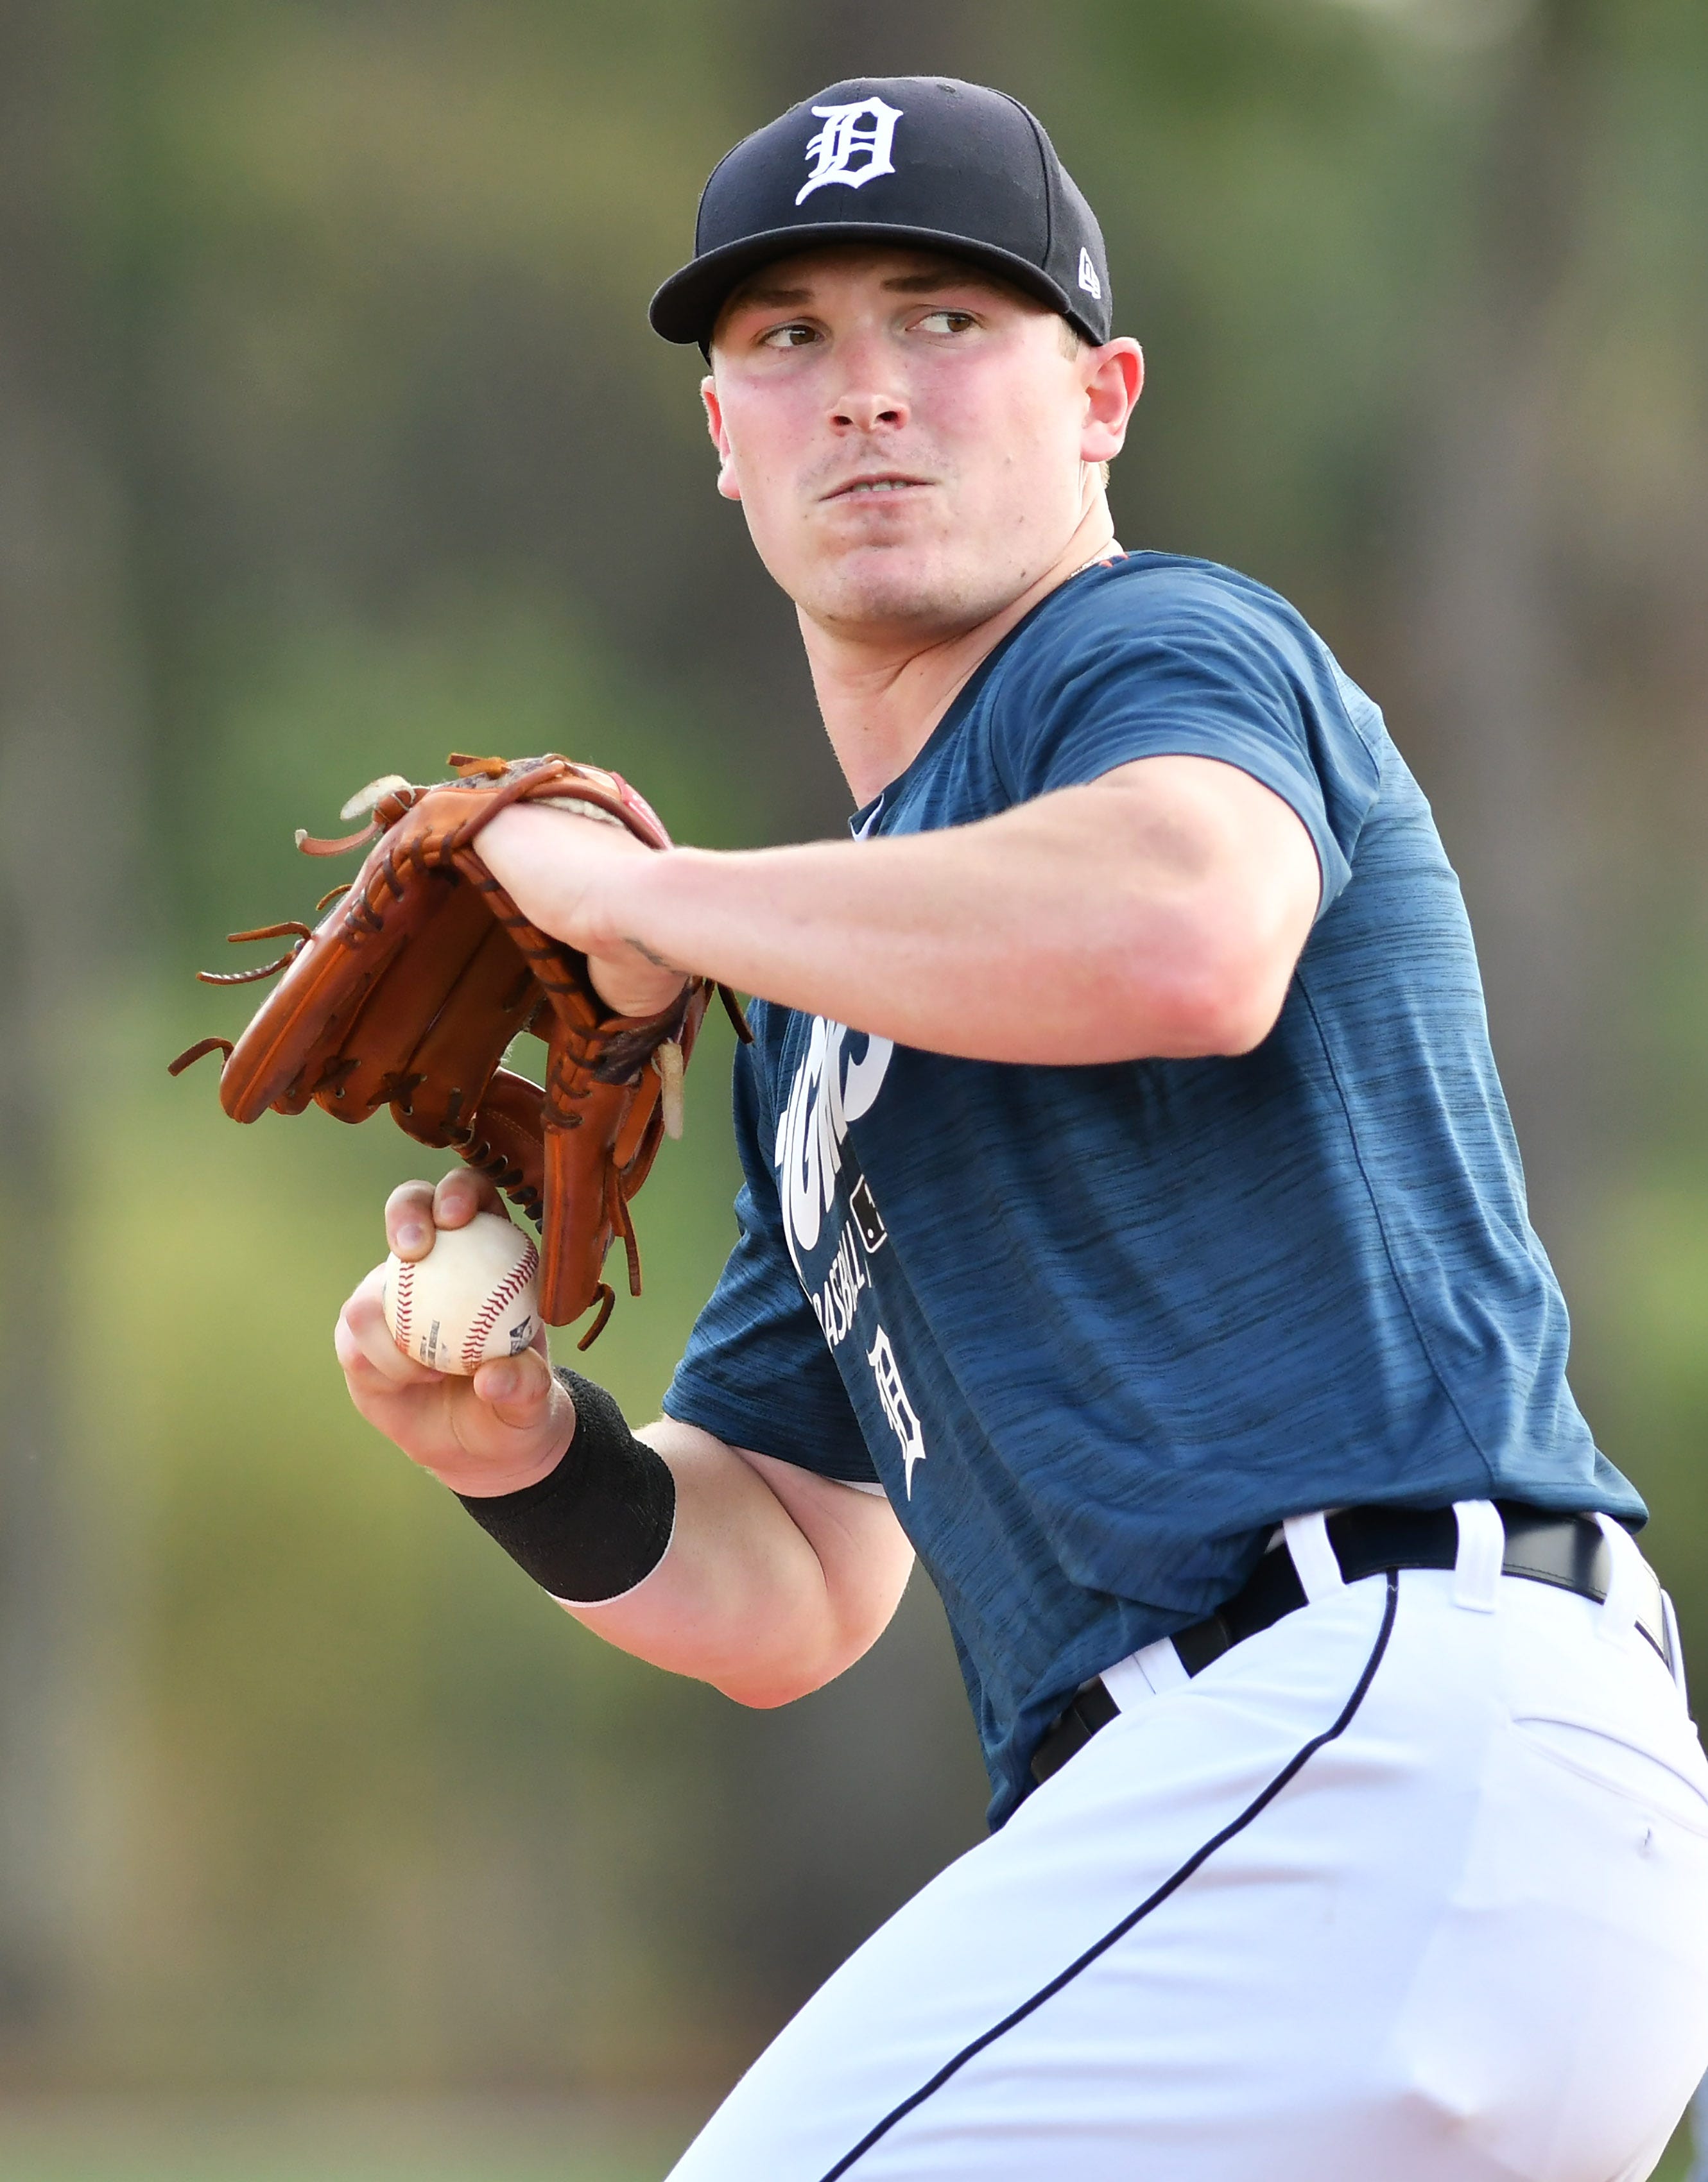 12. Beau Burrows, 23, 6-2, 215, RH starter: Just as Burrows seemed on his way to pushing for a rotation spot during 2020 spring camp, he had a slight mishap. It was known as 2019. Last season saw his earlier rising prospect graph nosedive, just as it had done during a late-summer trip to Double-A Erie in 2018. His numbers at Triple-A Toledo (5.51 ERA, 1.53 WHIP in 15 starts) last year were as ugly as some body ills that pounded him: biceps tendinitis, shoulder inflammation, as well as issues with an oblique muscle. It’s always best to wait out pitchers with size and youth and talent that could find its old groove. There has been some talk of Burrows shifting to the bullpen. The Tigers don’t care where he helps. They only want him to help. Preferably, soon.